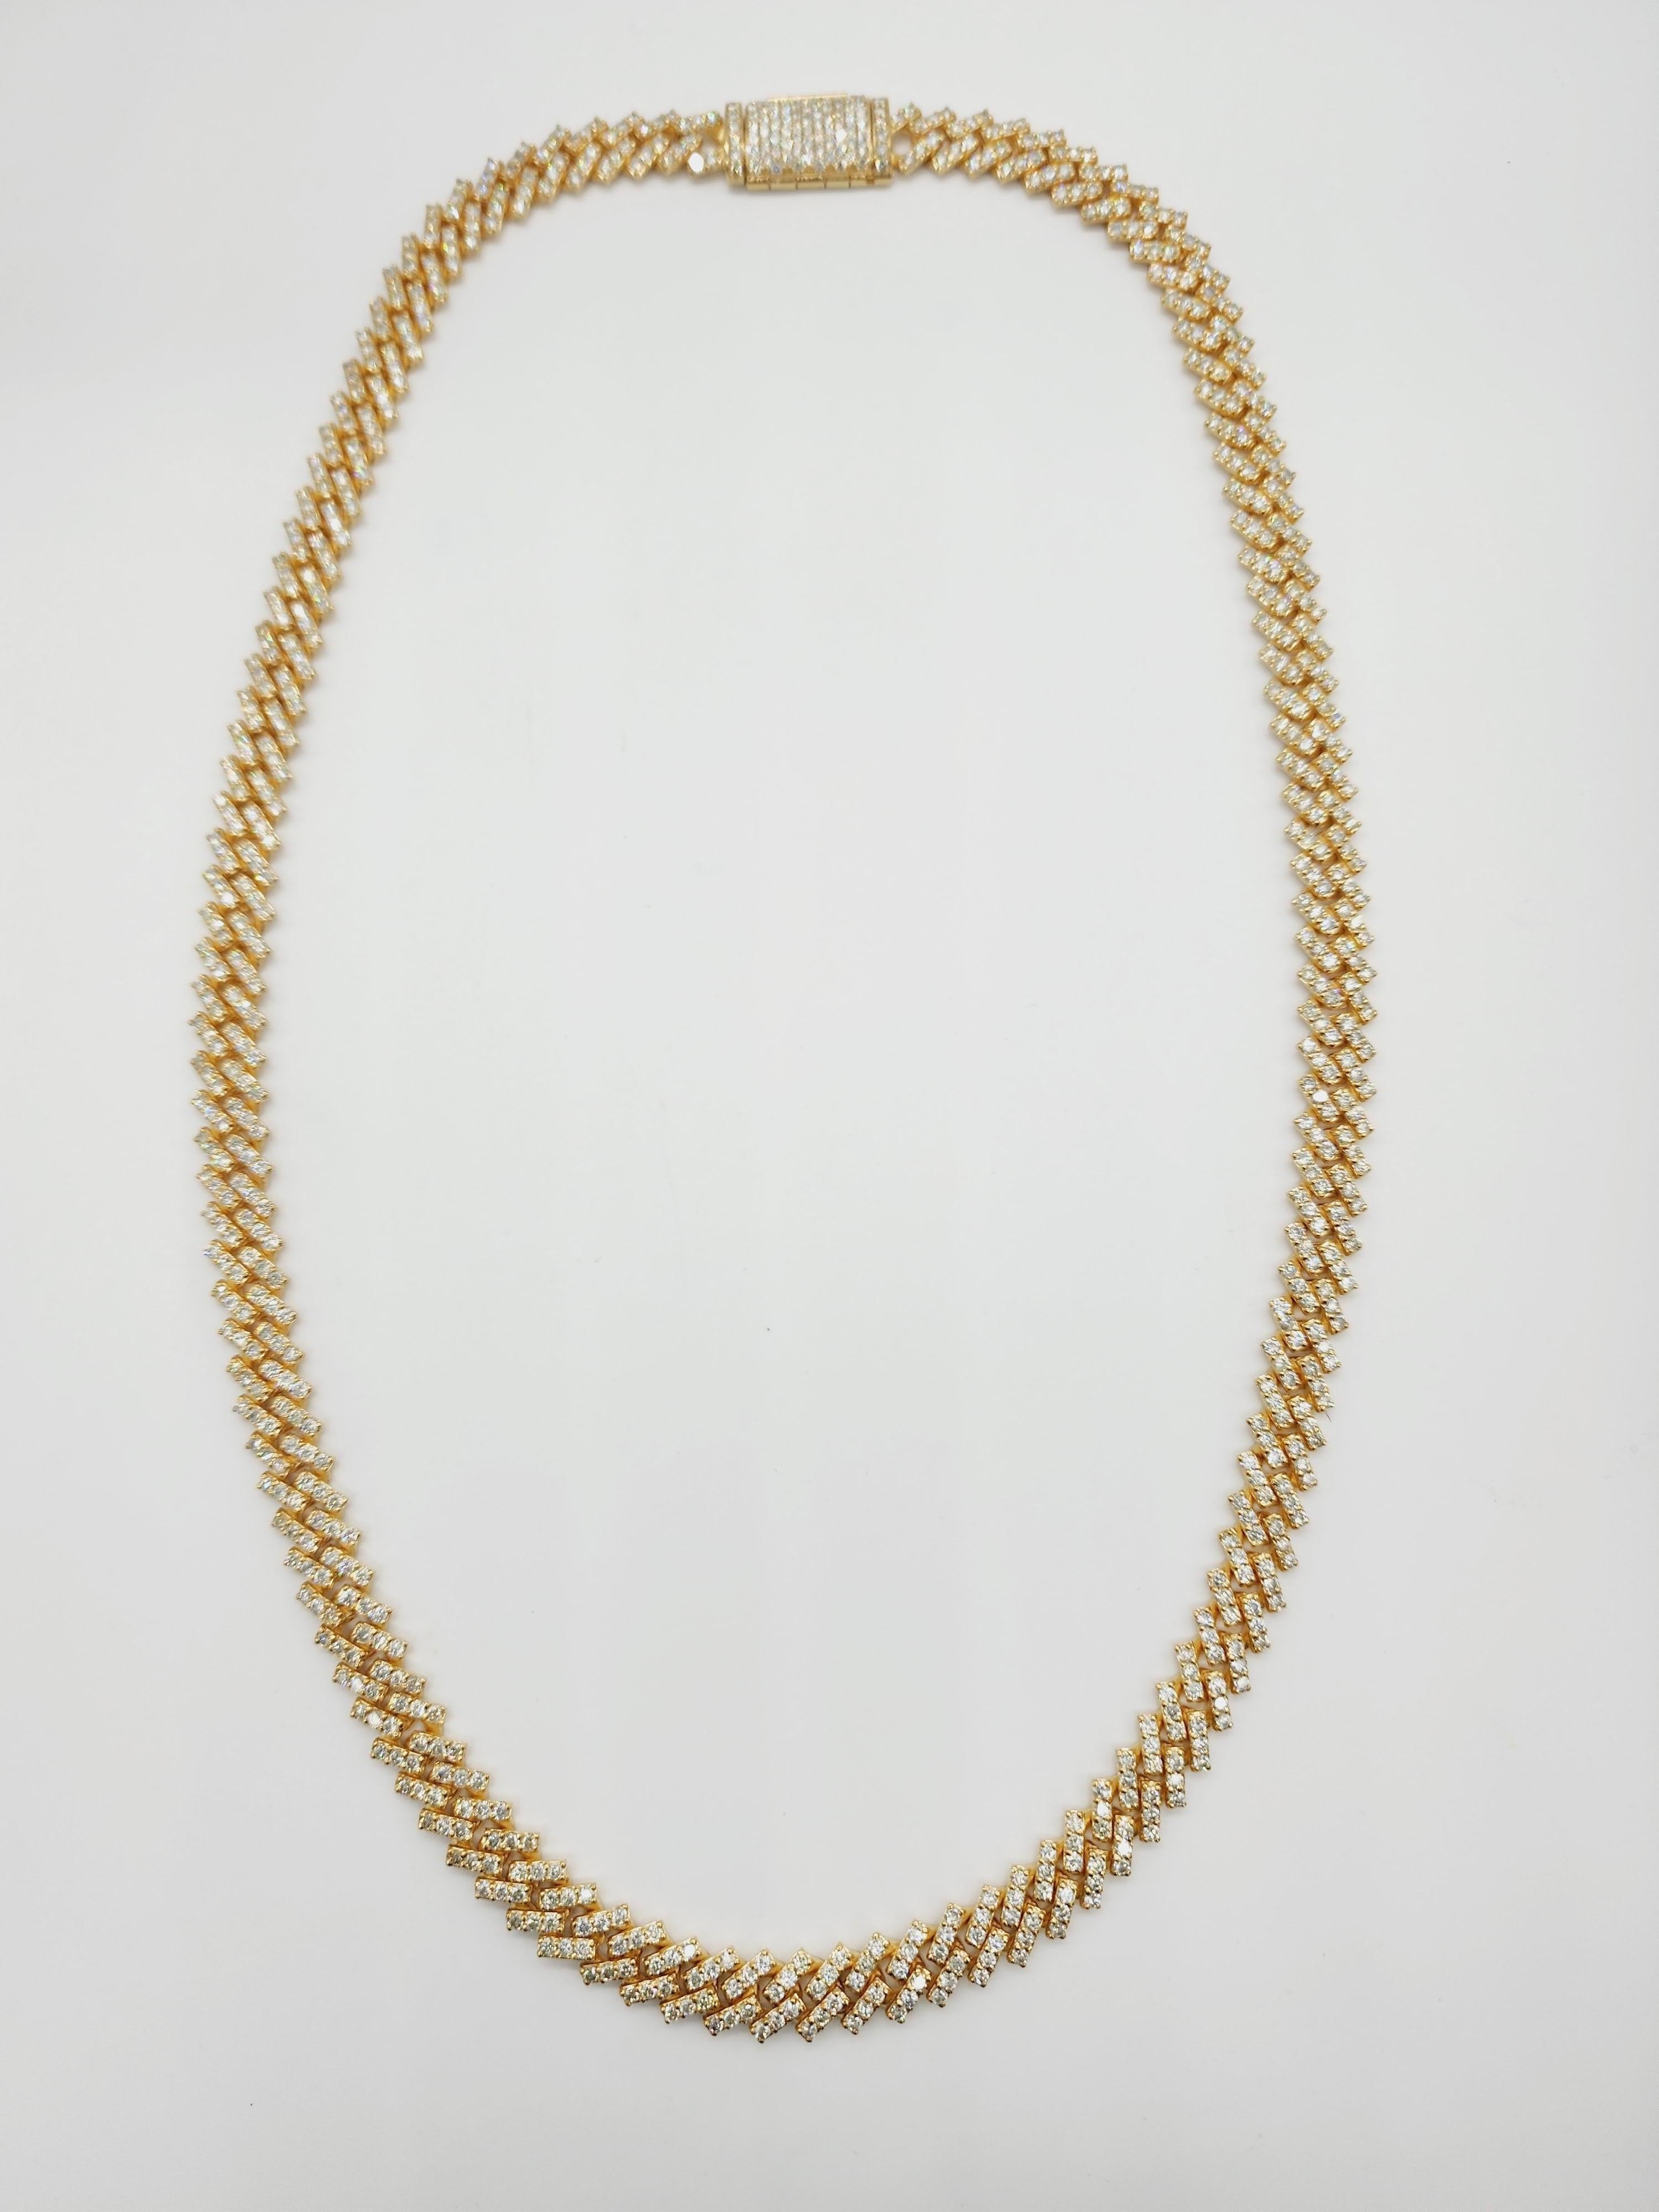 22.75 Carats Total Weight Heavy Gold Cuban Necklace Chain 14 Karats Yellow Gold
20 inch, 10 mm wide, Average Color H-I, Clarity SI,
105 Grams Solid Gold , all natural shiny diamonds.